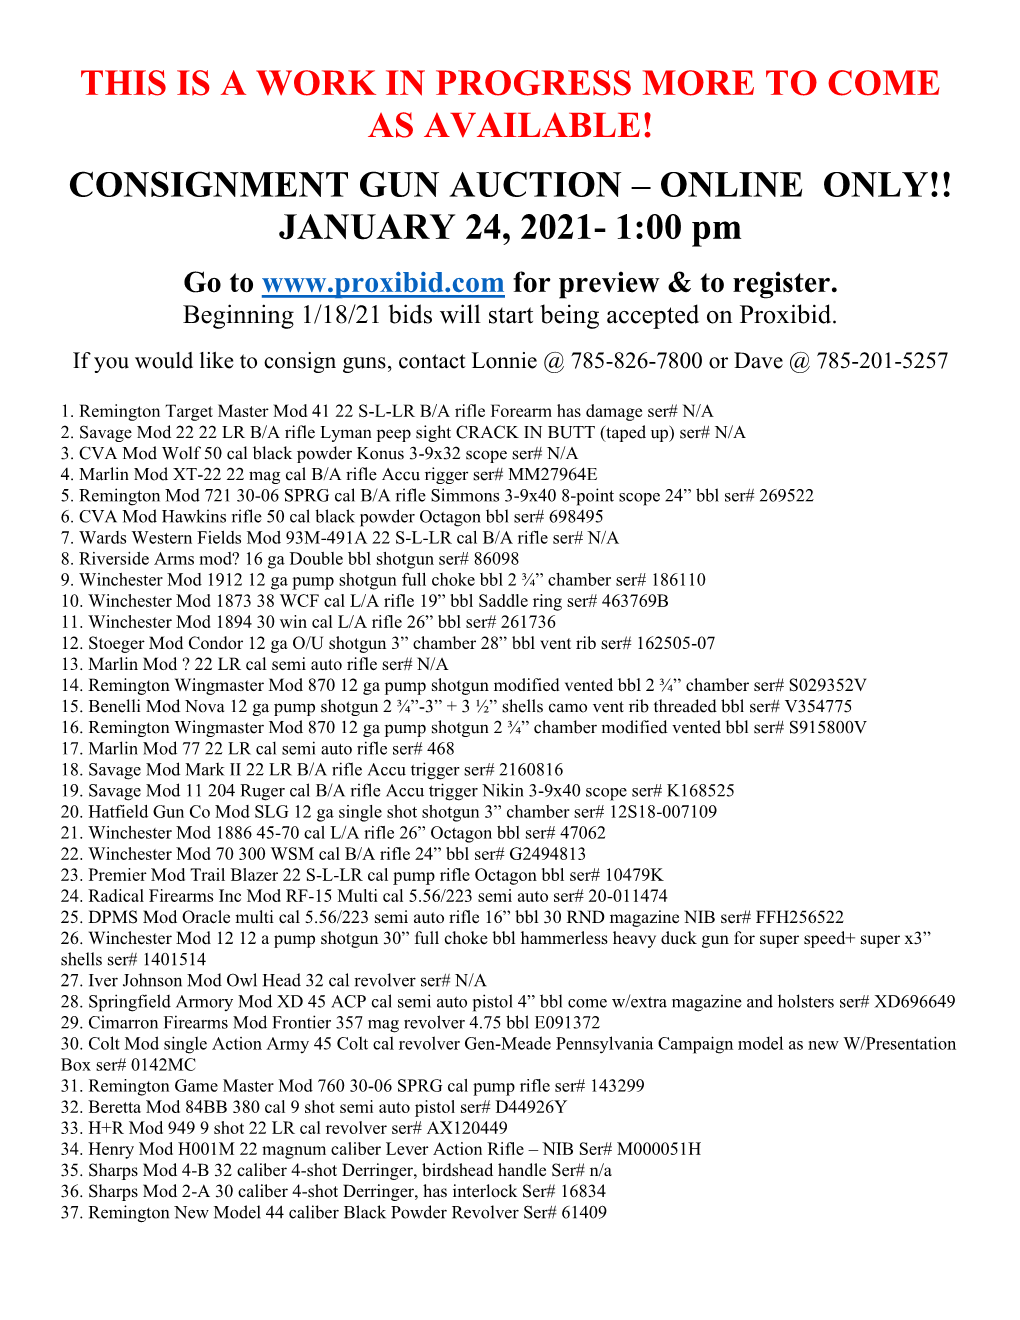 Consignment Gun Auction – Online Only!!